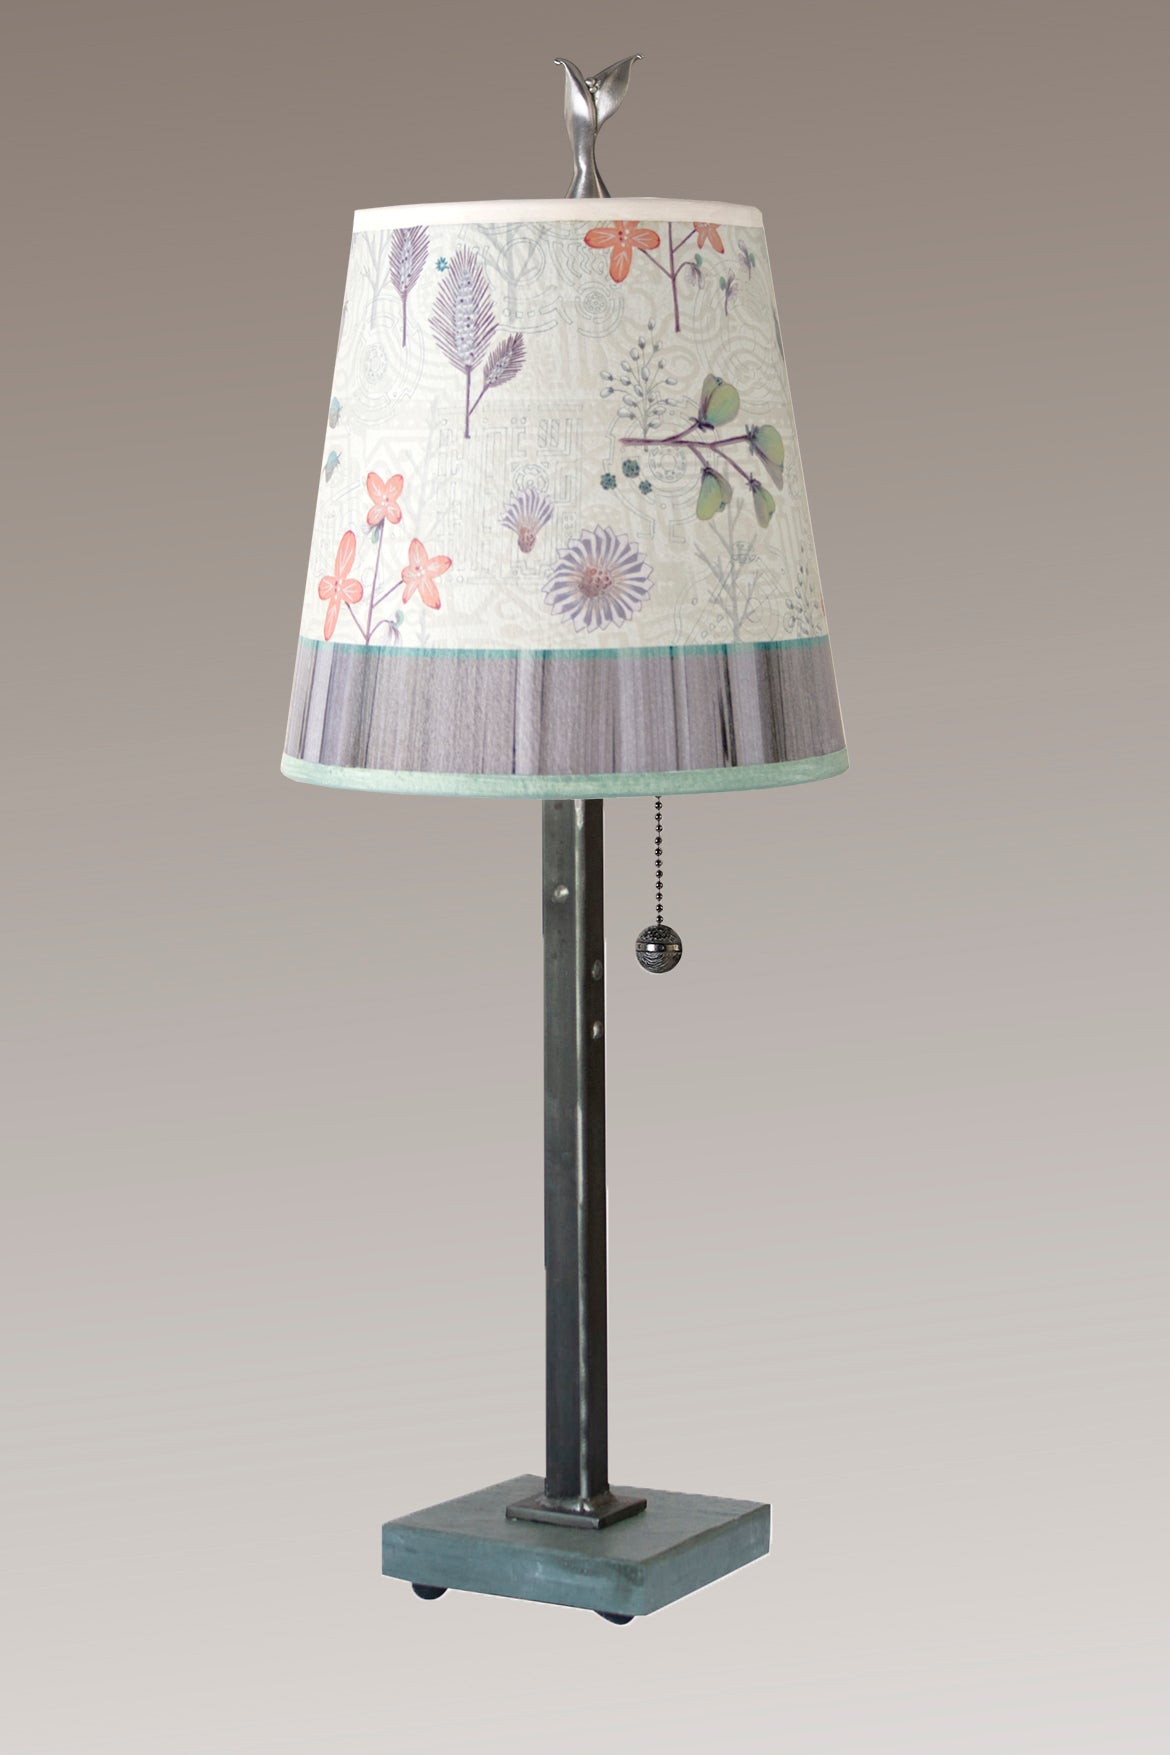 Janna Ugone &amp; Co Table Lamps Steel Table Lamp with Small Drum Shade in Flora &amp; Maze